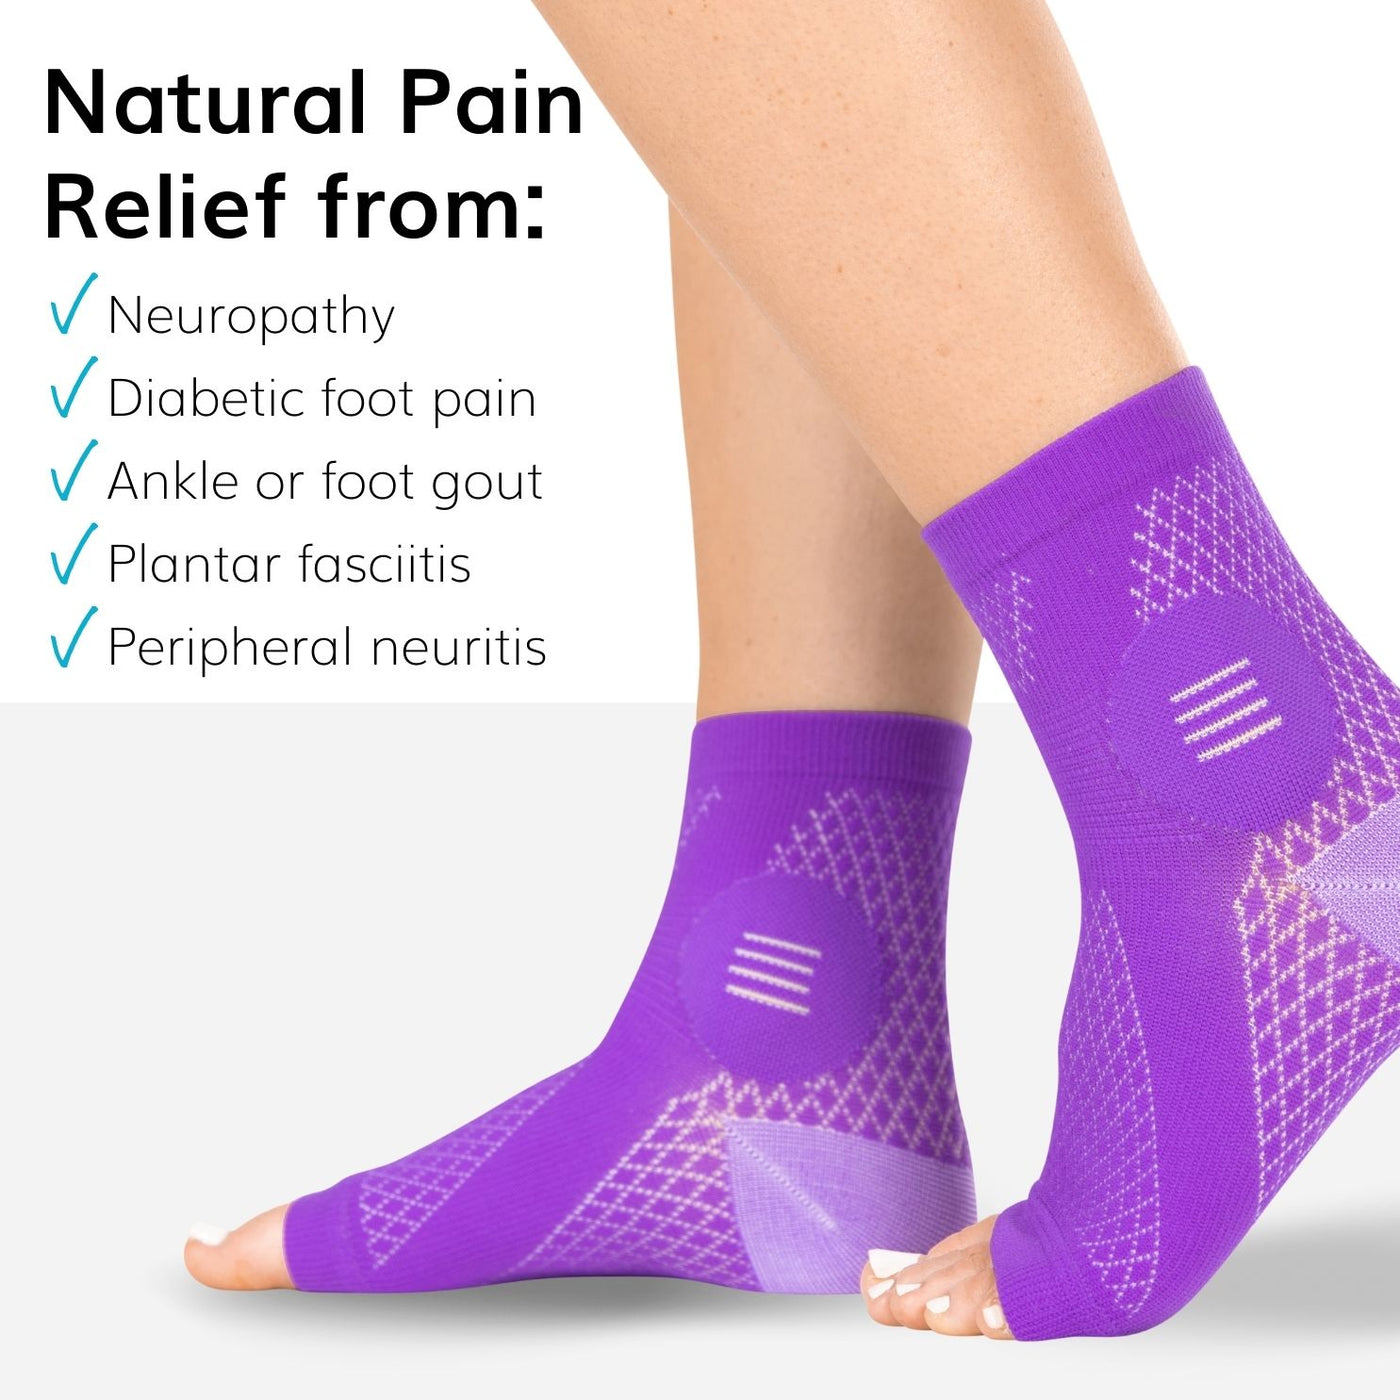 The braceability neuropathy socks give natural pain relief from diabetic foot pain, ankle or foot gout, and plantar fasciitis